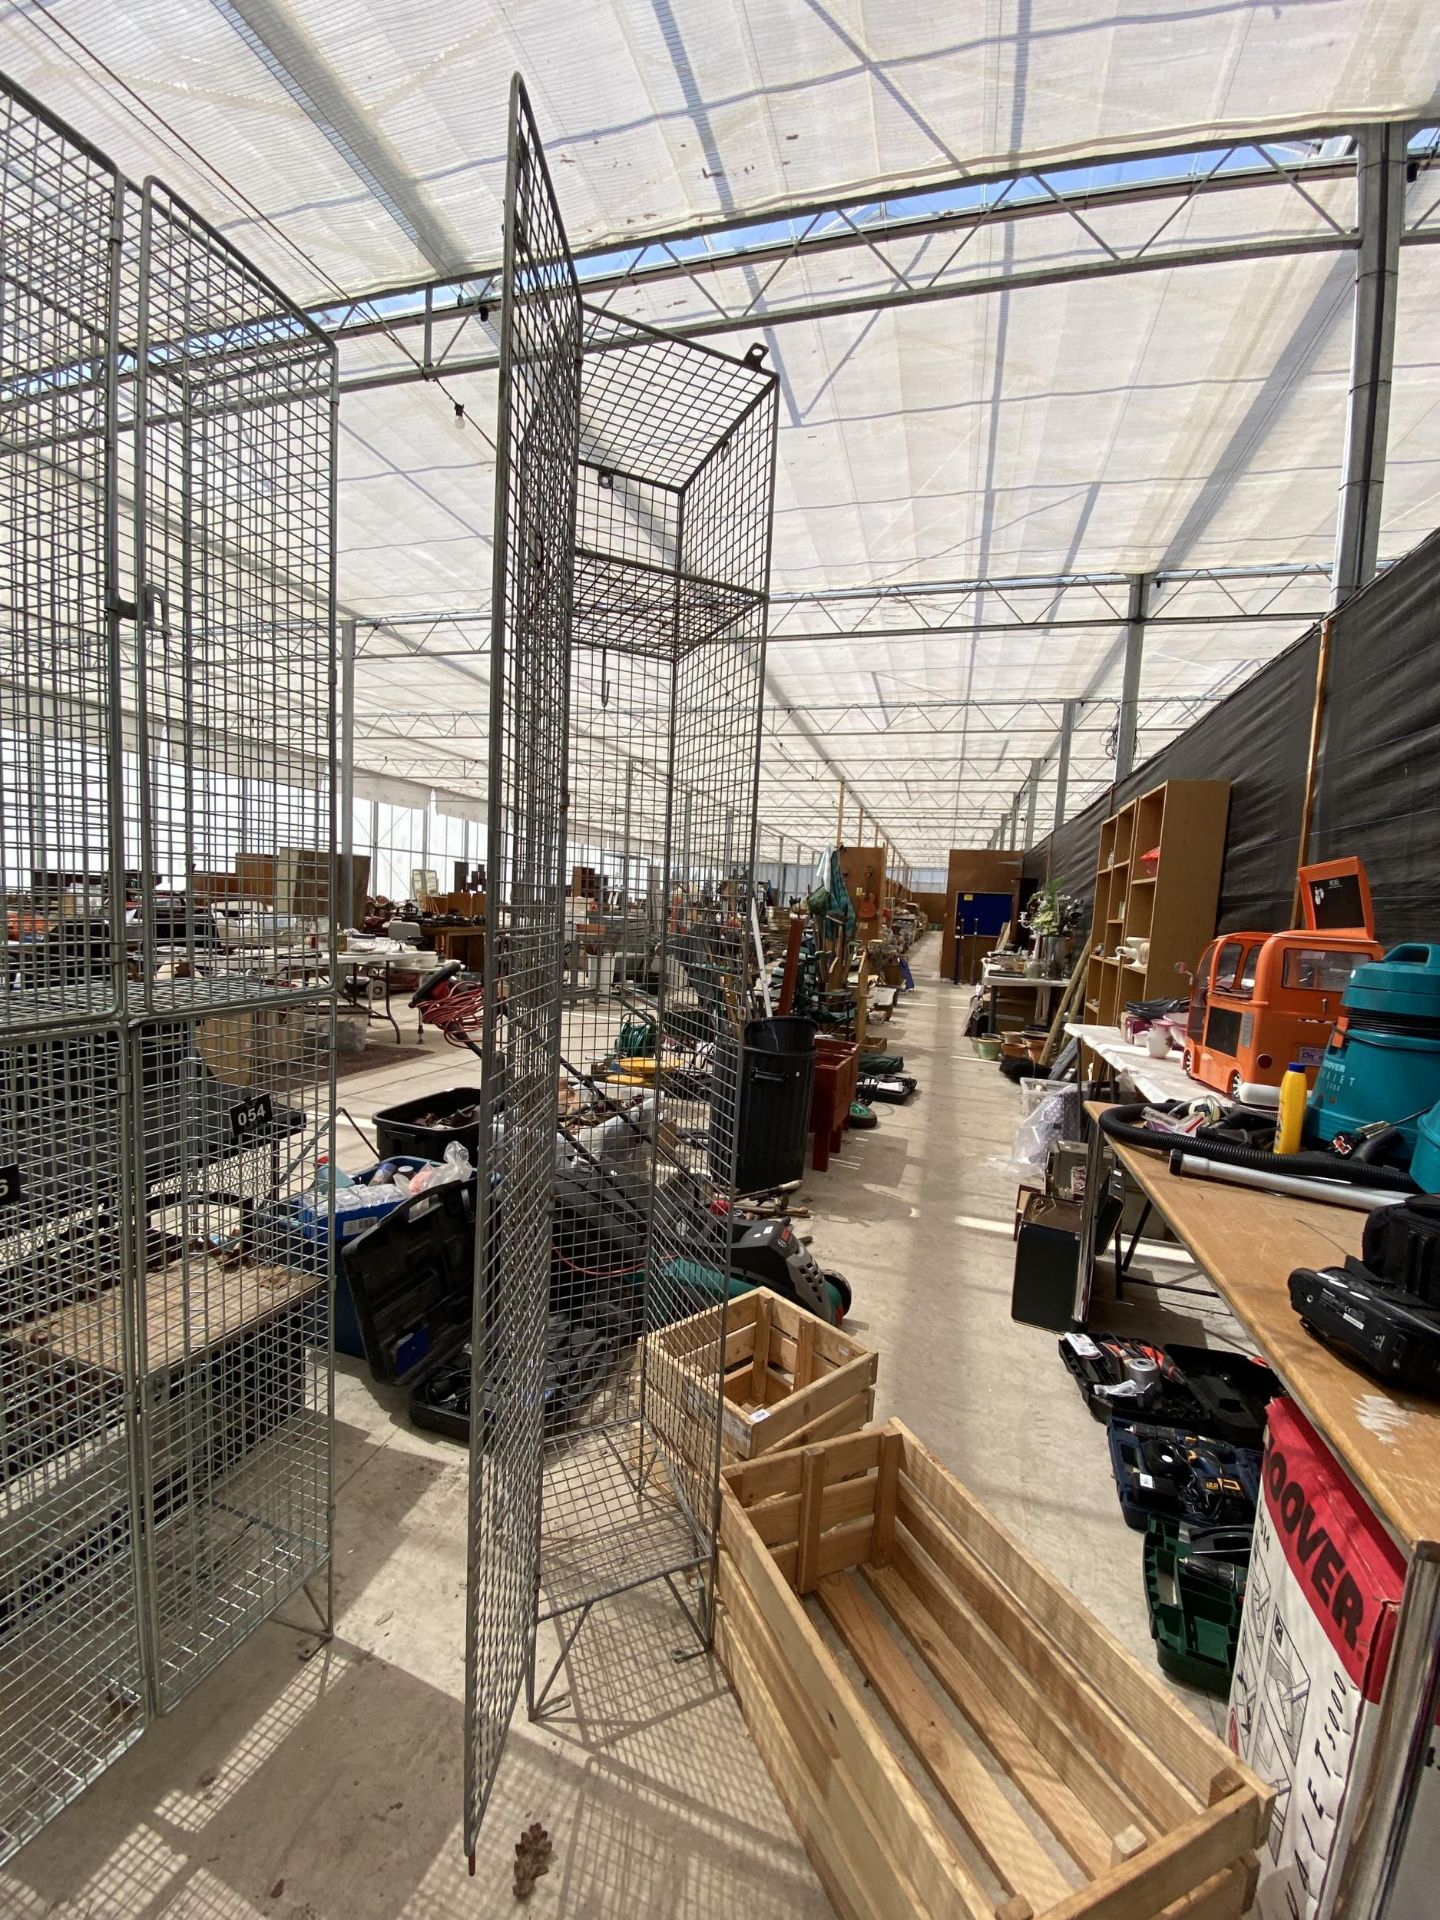 A TALL METAL CAGE / LOCKER - Image 2 of 5